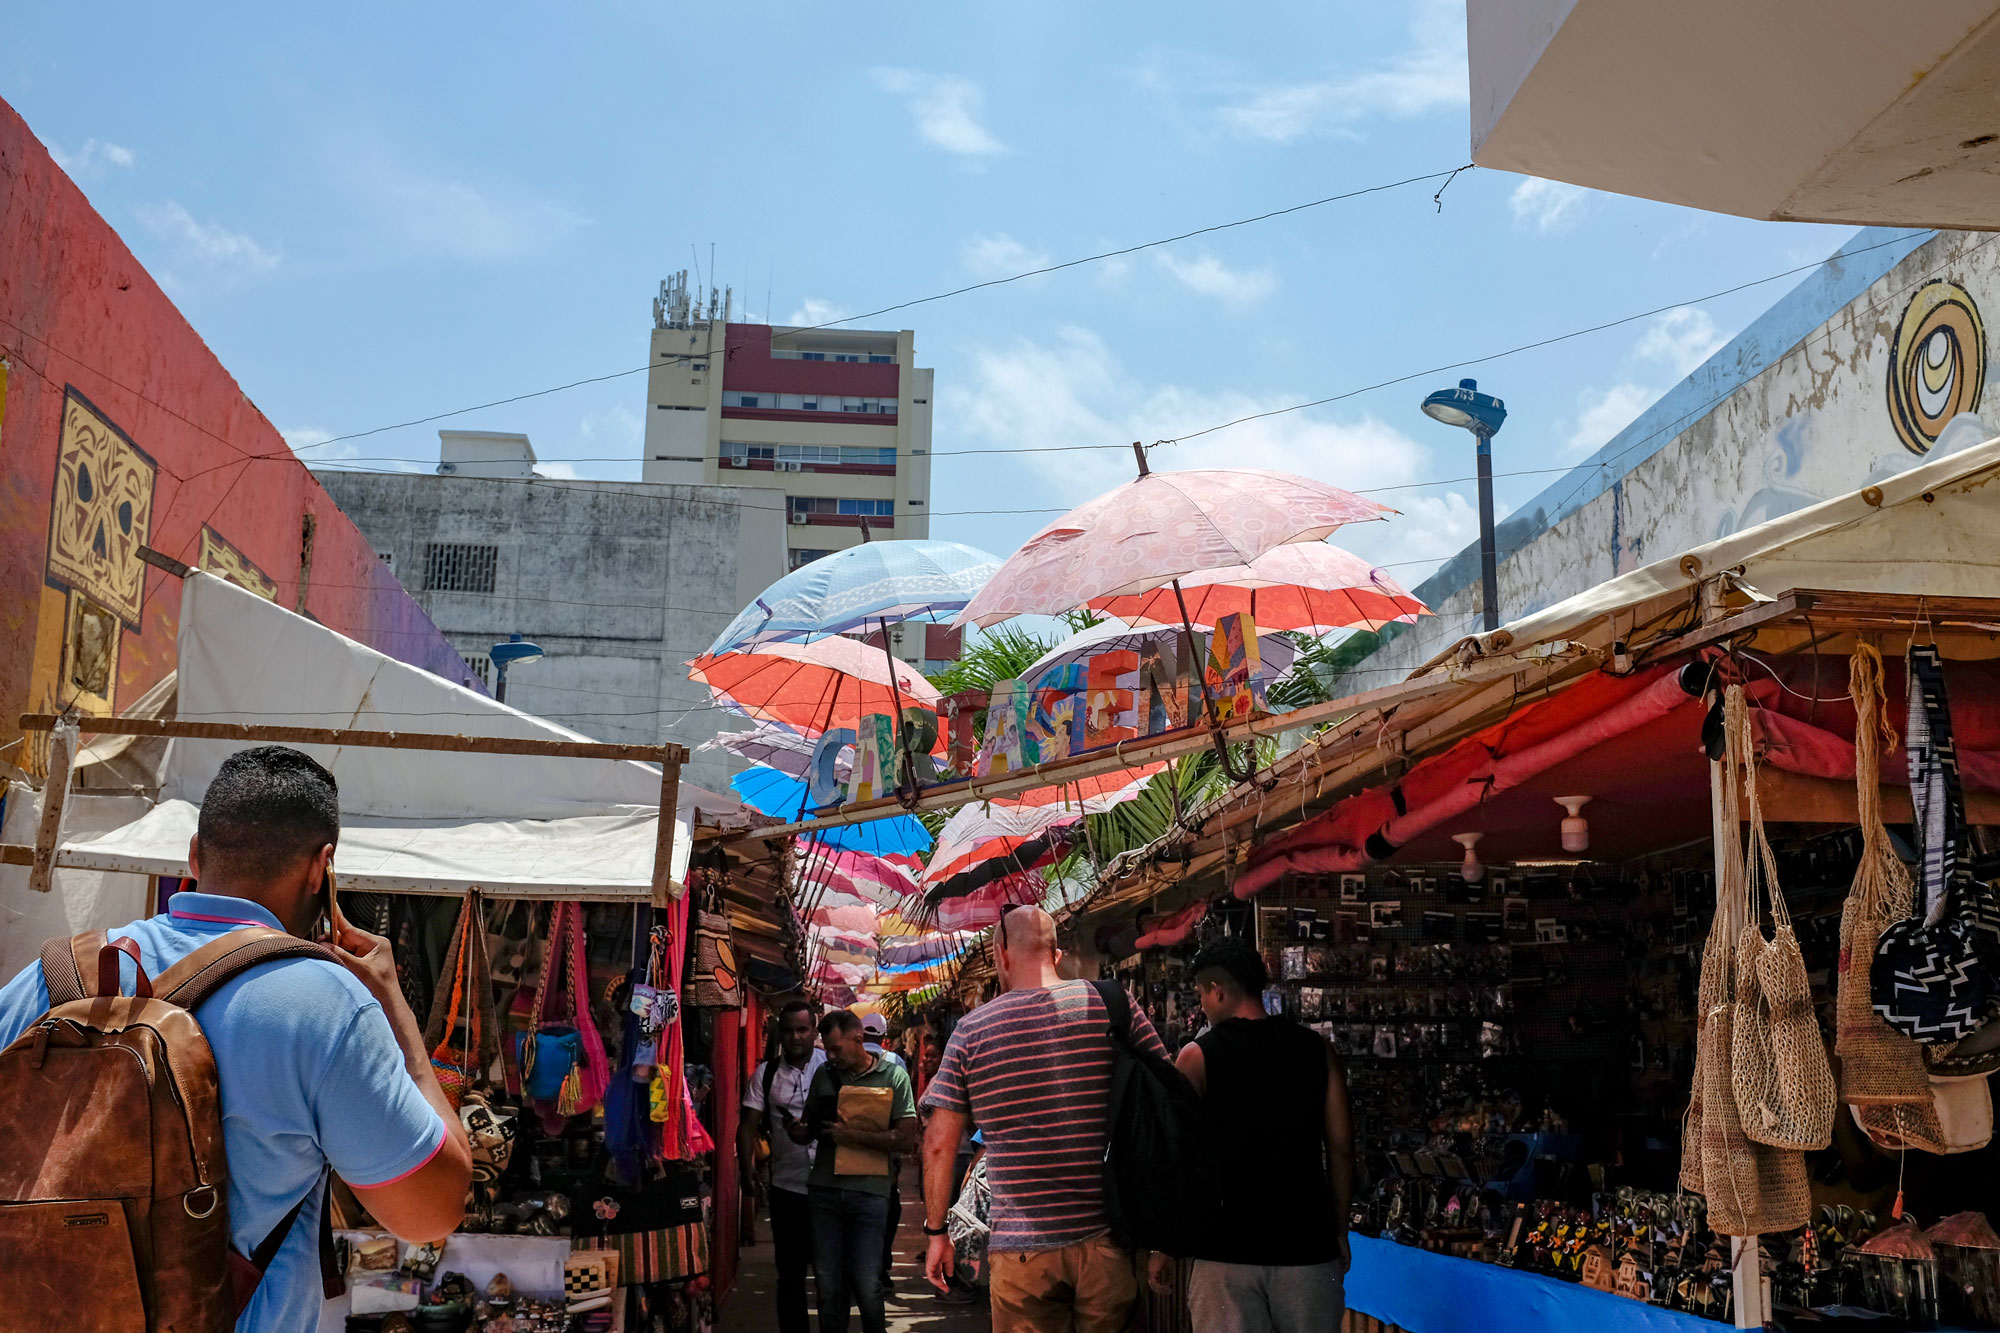 Street market in Cartagena. There are lots of vendors and umbrellas covering the walkway